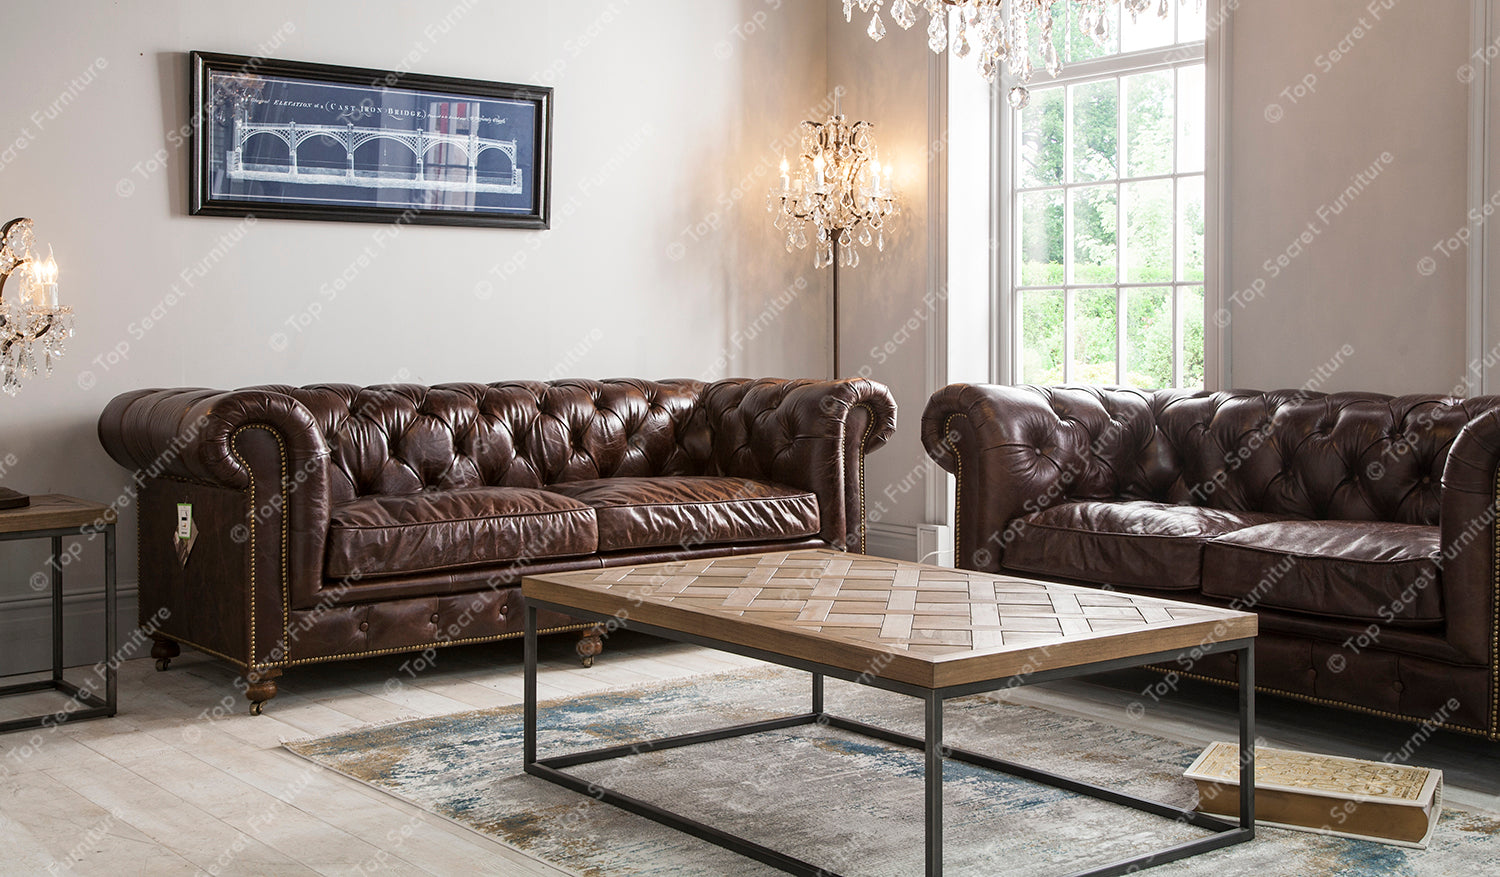 Chesterfield Leather Sofas from Top Secret Furniture, Holmes Chapel, Cheshire